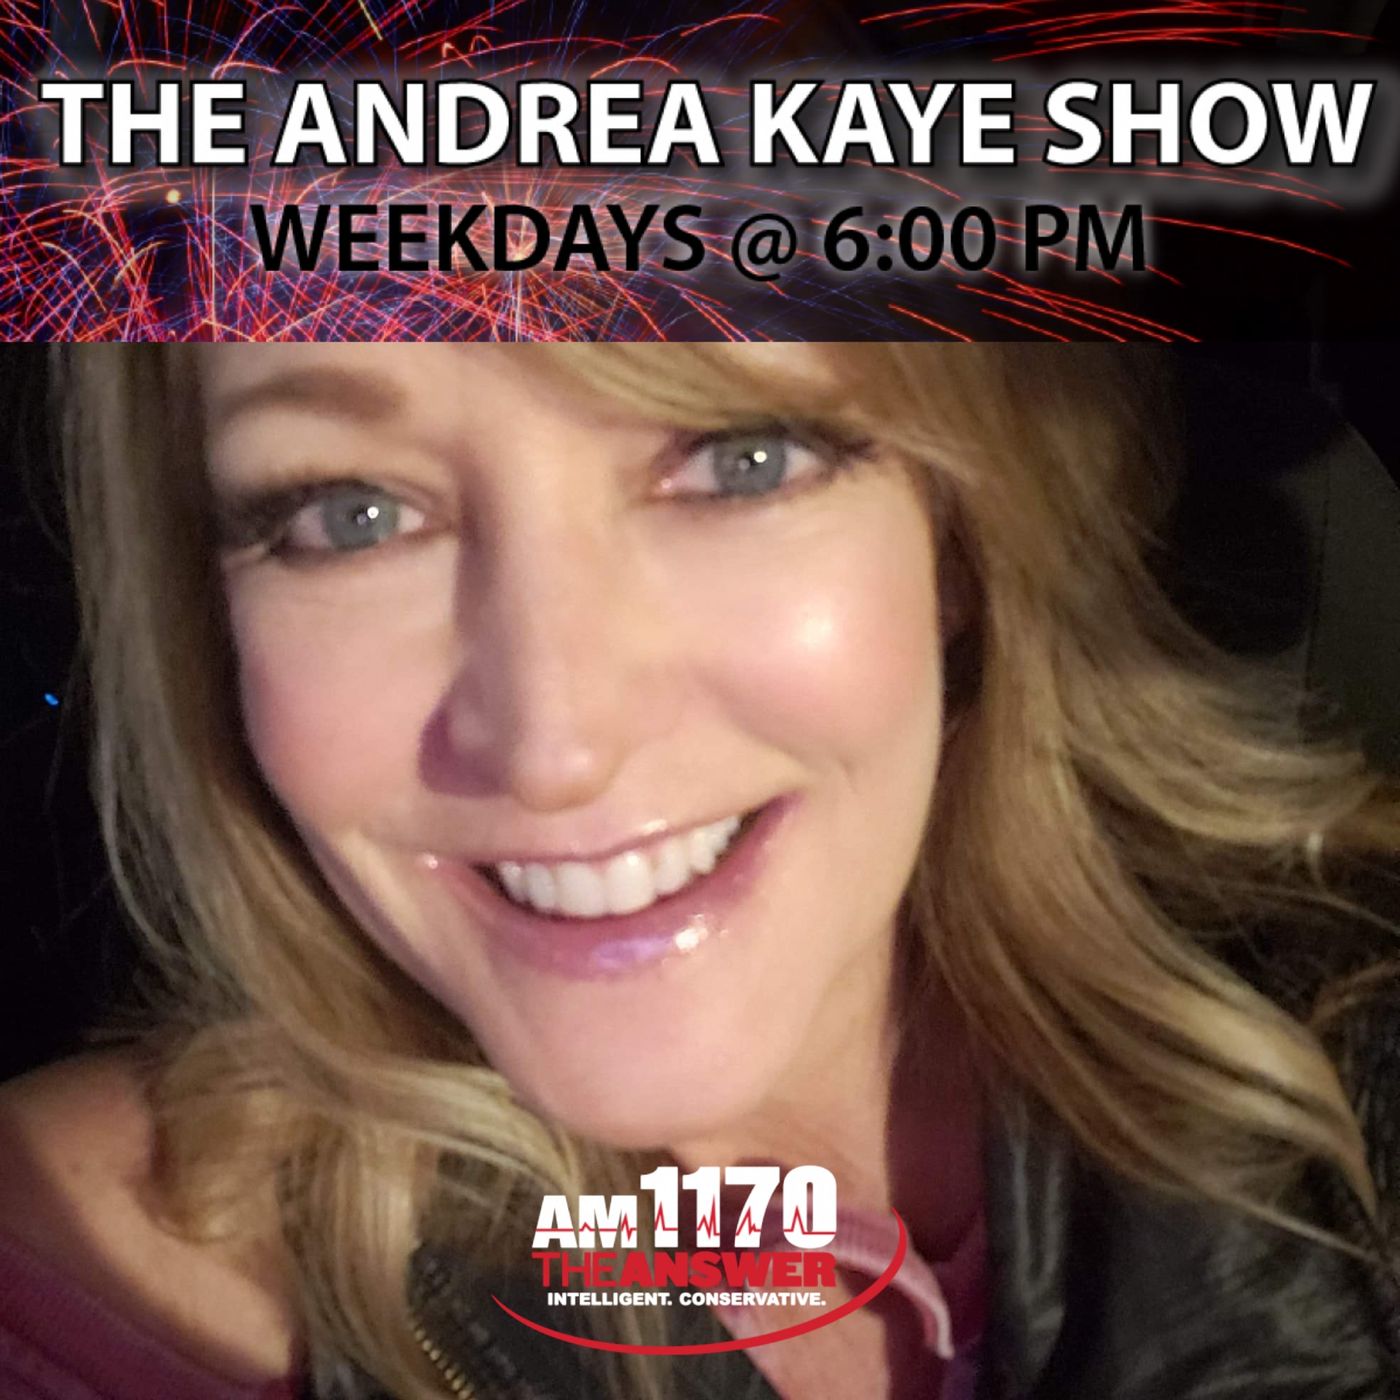 Andrea Kaye Discusses All of Today’s Hot Topics, in her Unique, Southern, Sassy Style